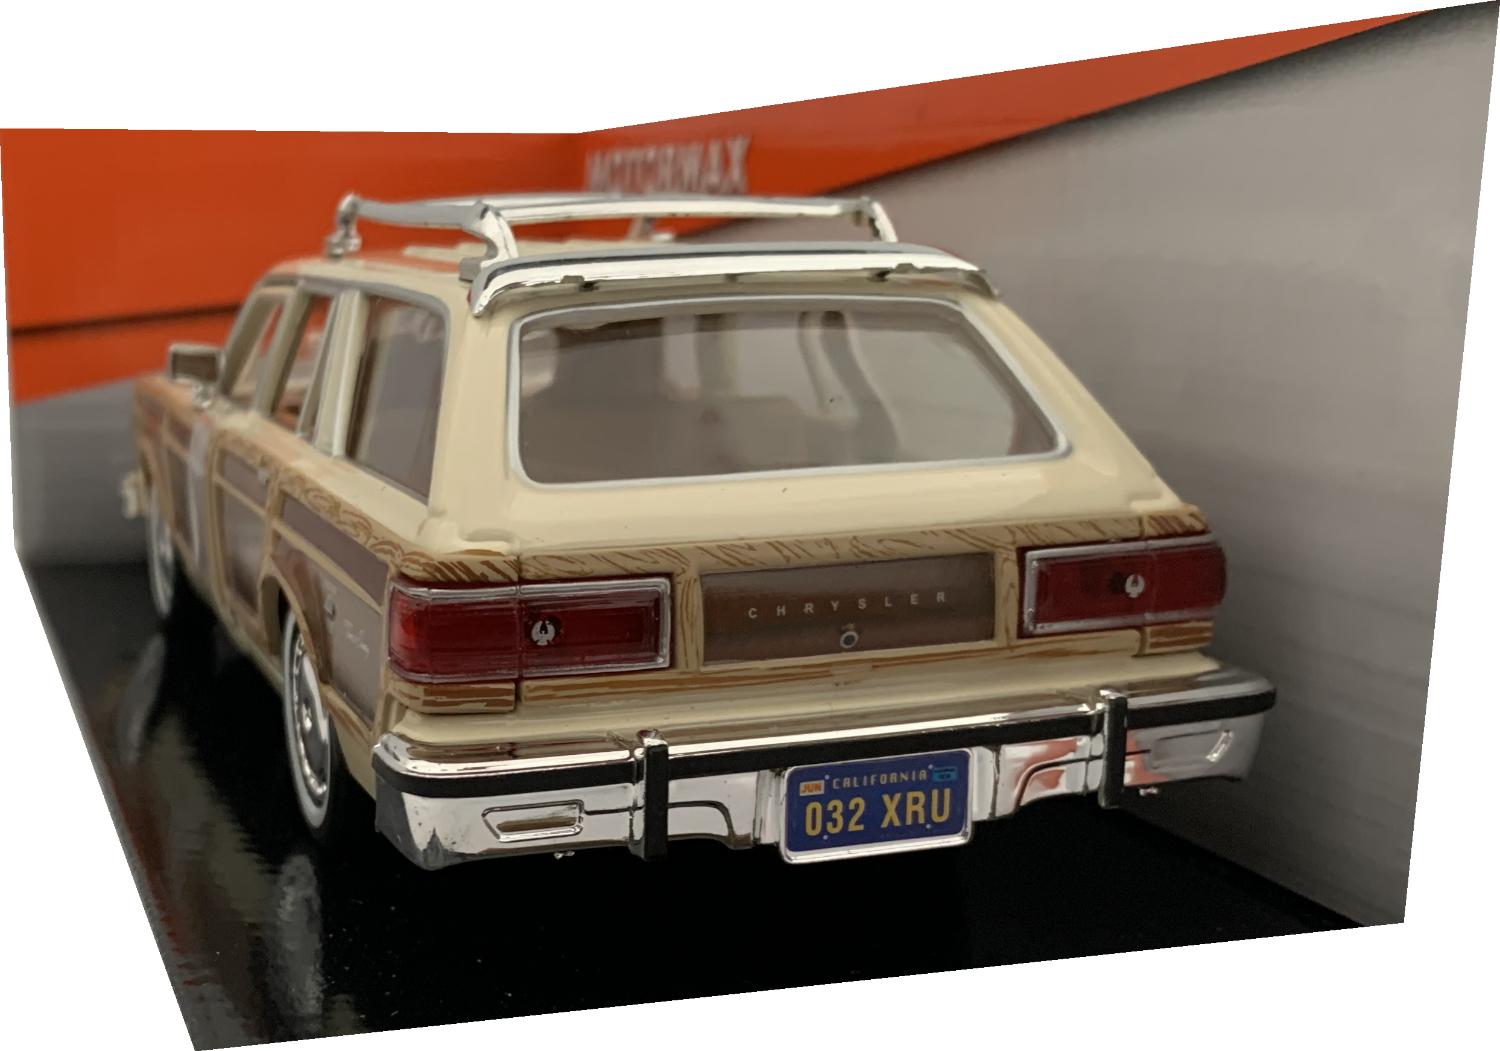 Chrysler LeBaron Town & Country 1979 in beige 1:24 scale model, Motormax